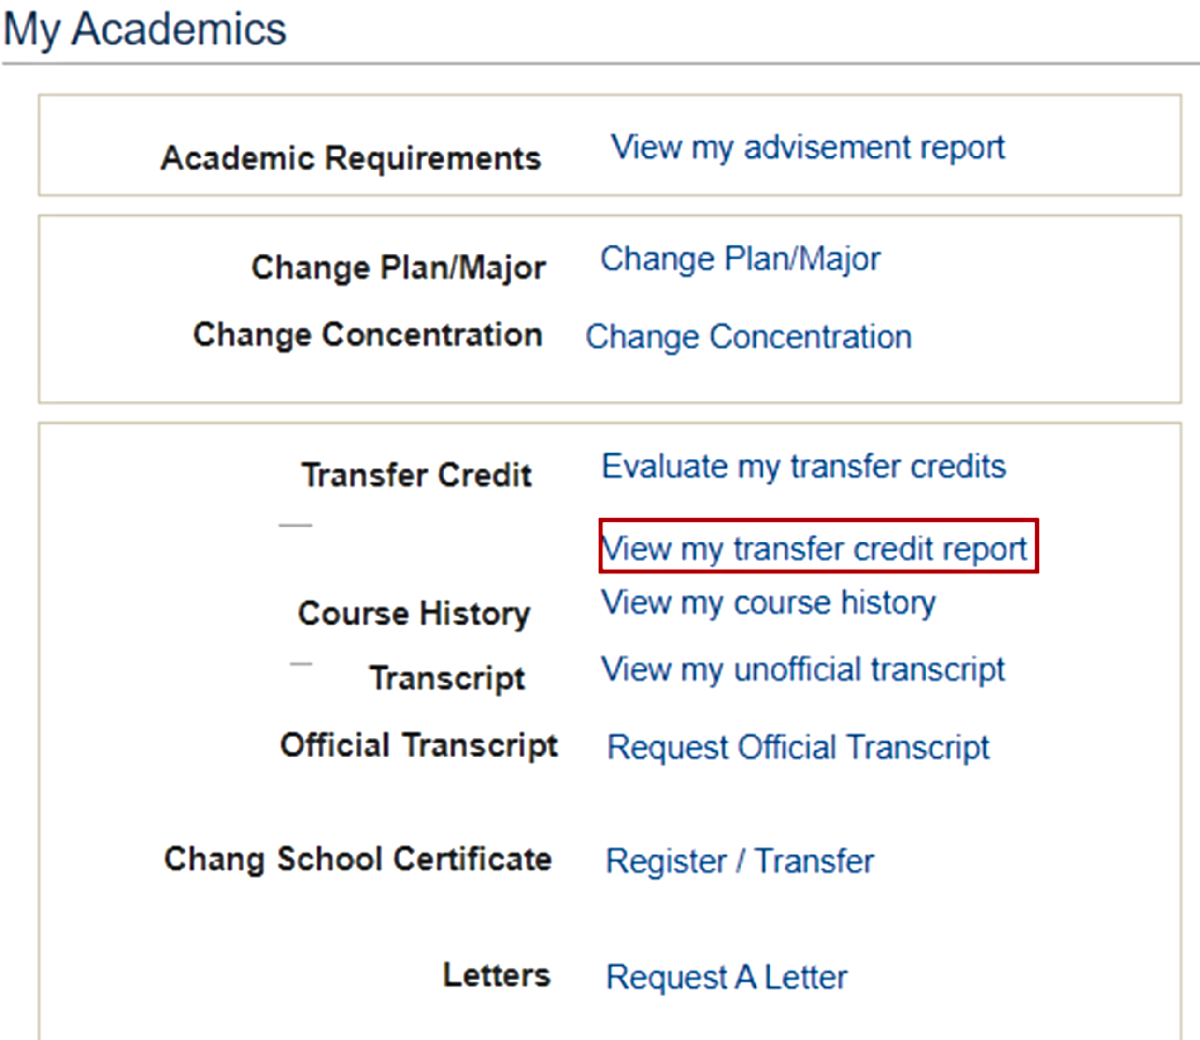 Highlighted 'View my transfer credit report' option in My Academics section